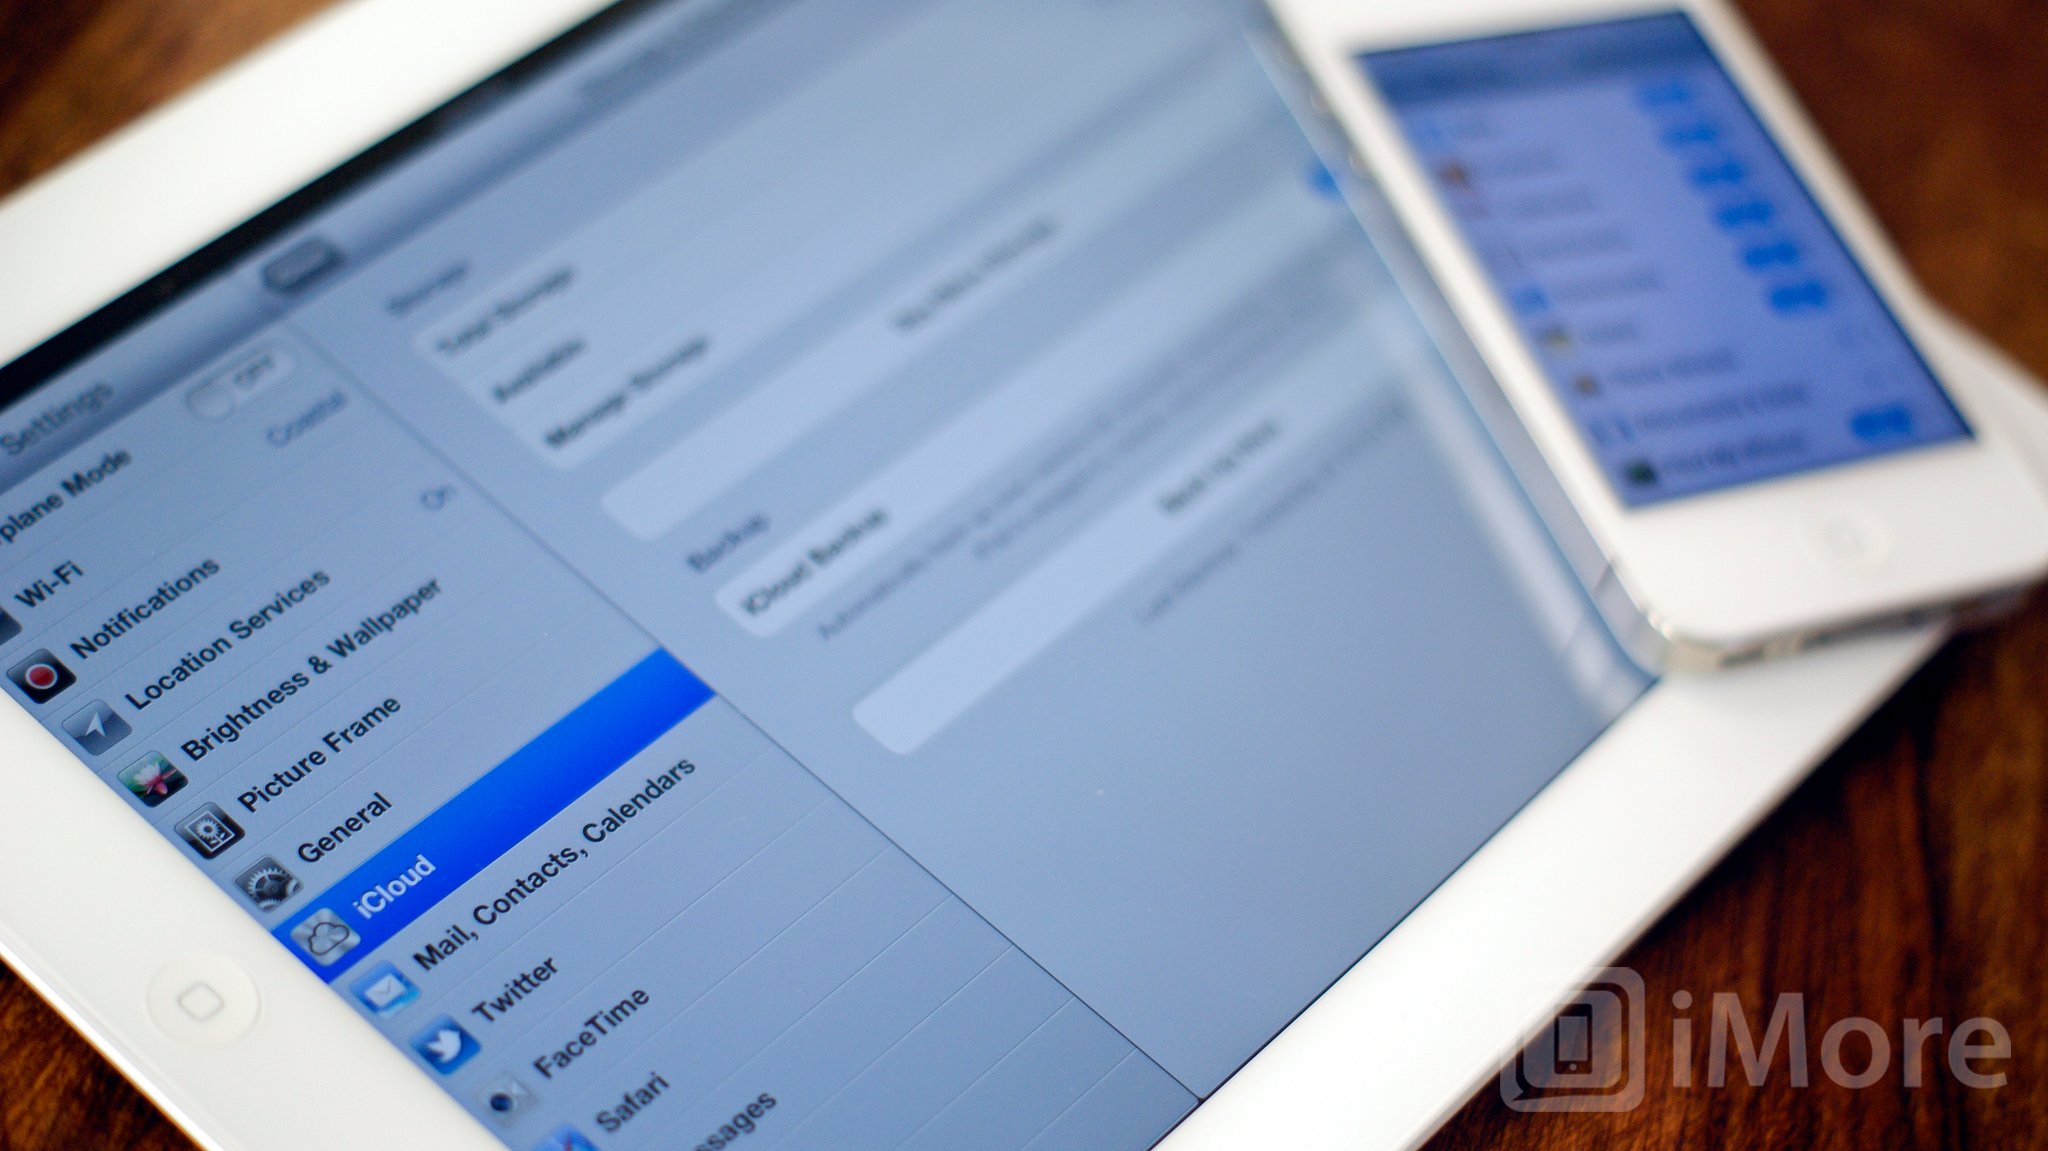 How to manage iCloud accounts for families and across multiple devices